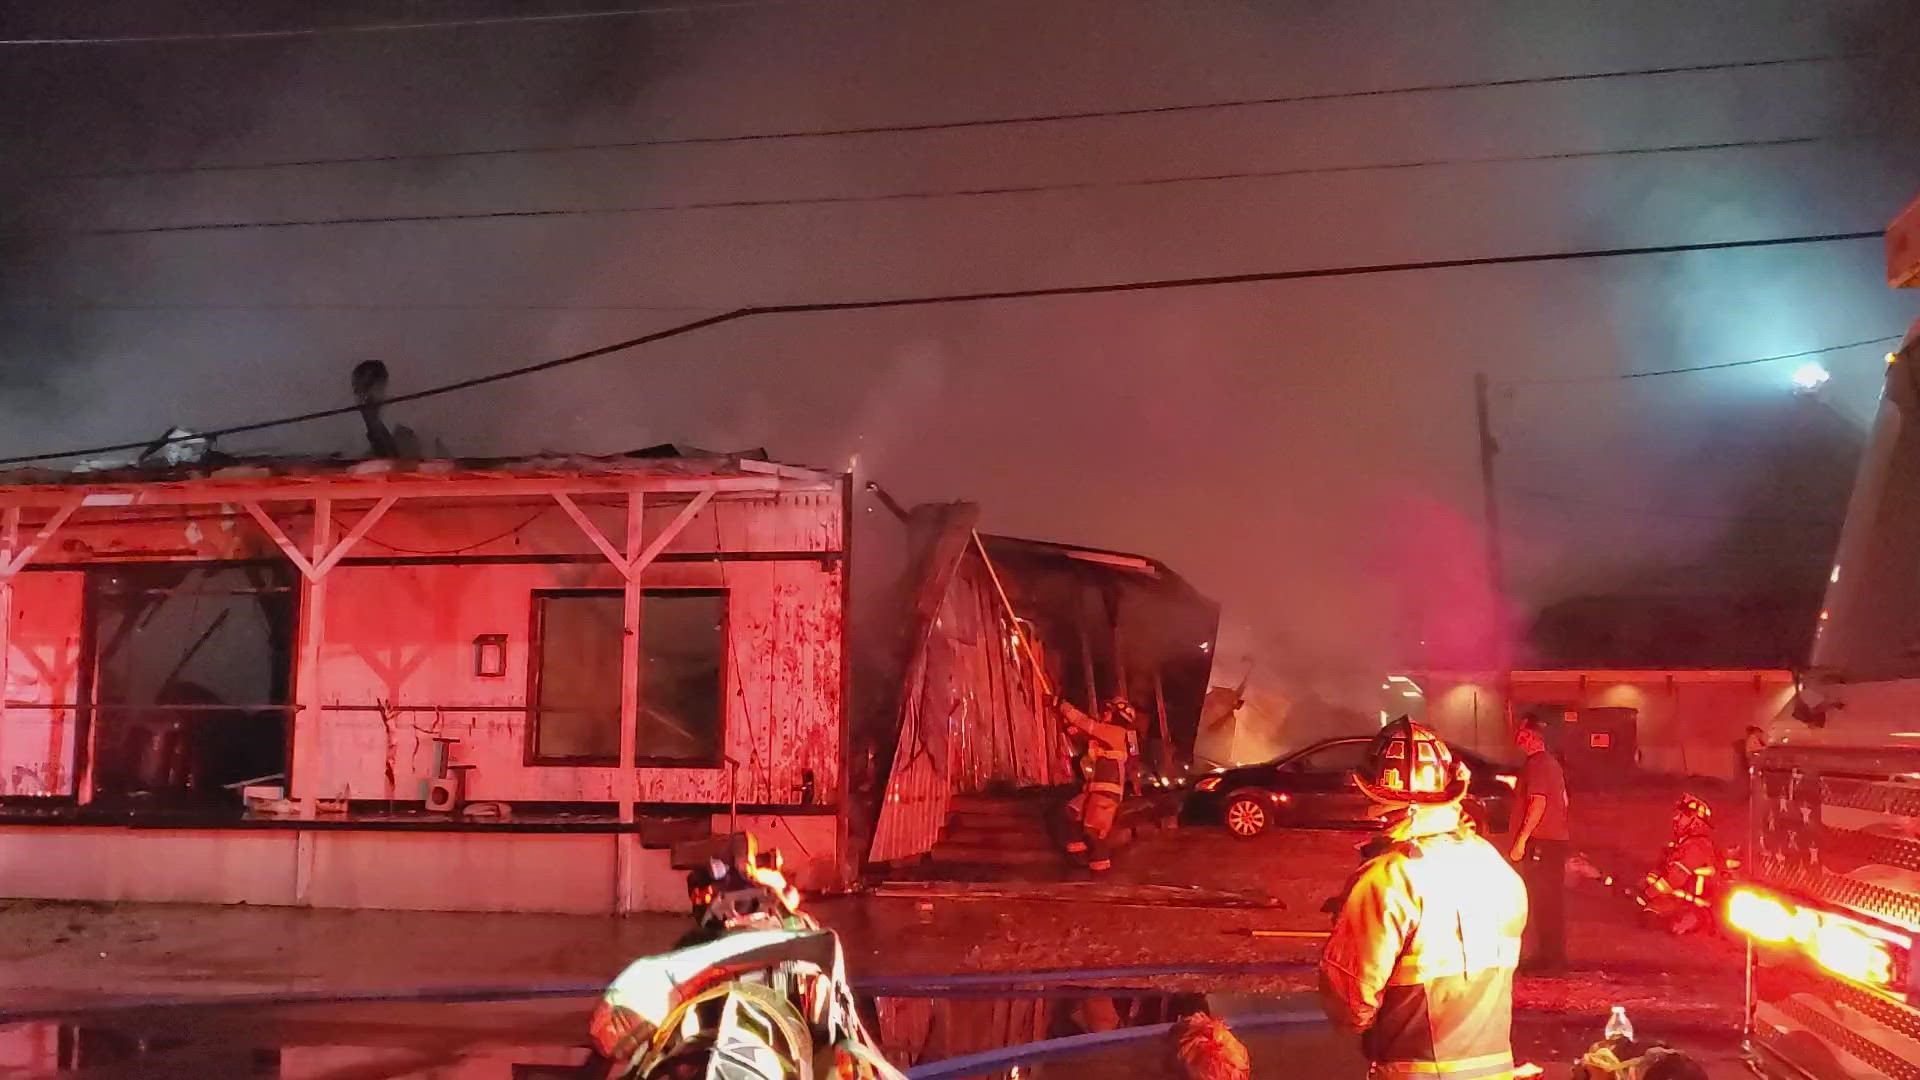 A fire destroyed the historic Marsolan's Feed and Seed store in downtown Covington. Video: Cindy Schneida.